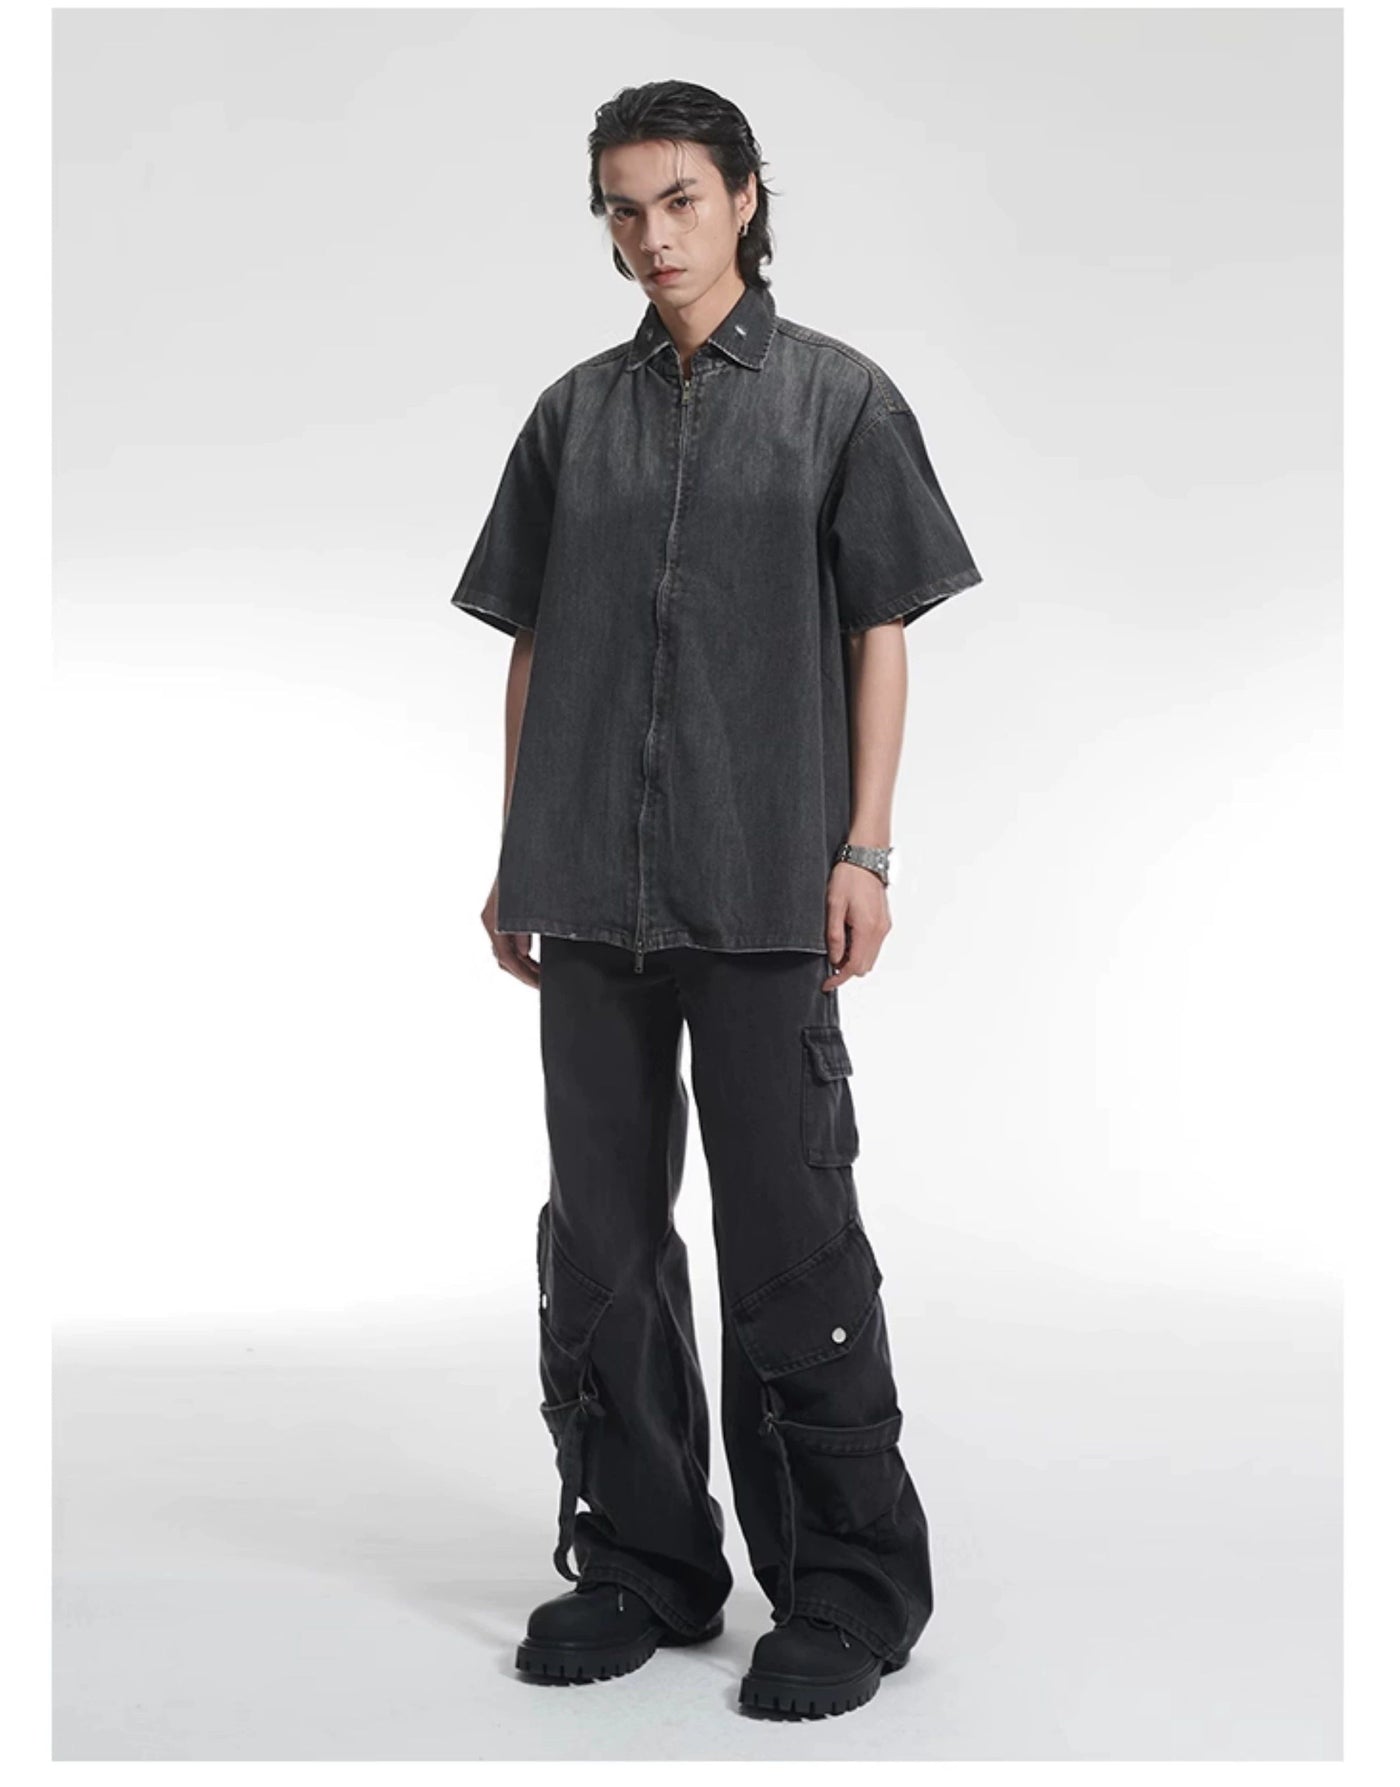 Gradient Washed Denim Short Sleeve Shirt Korean Street Fashion Shirt By A PUEE Shop Online at OH Vault